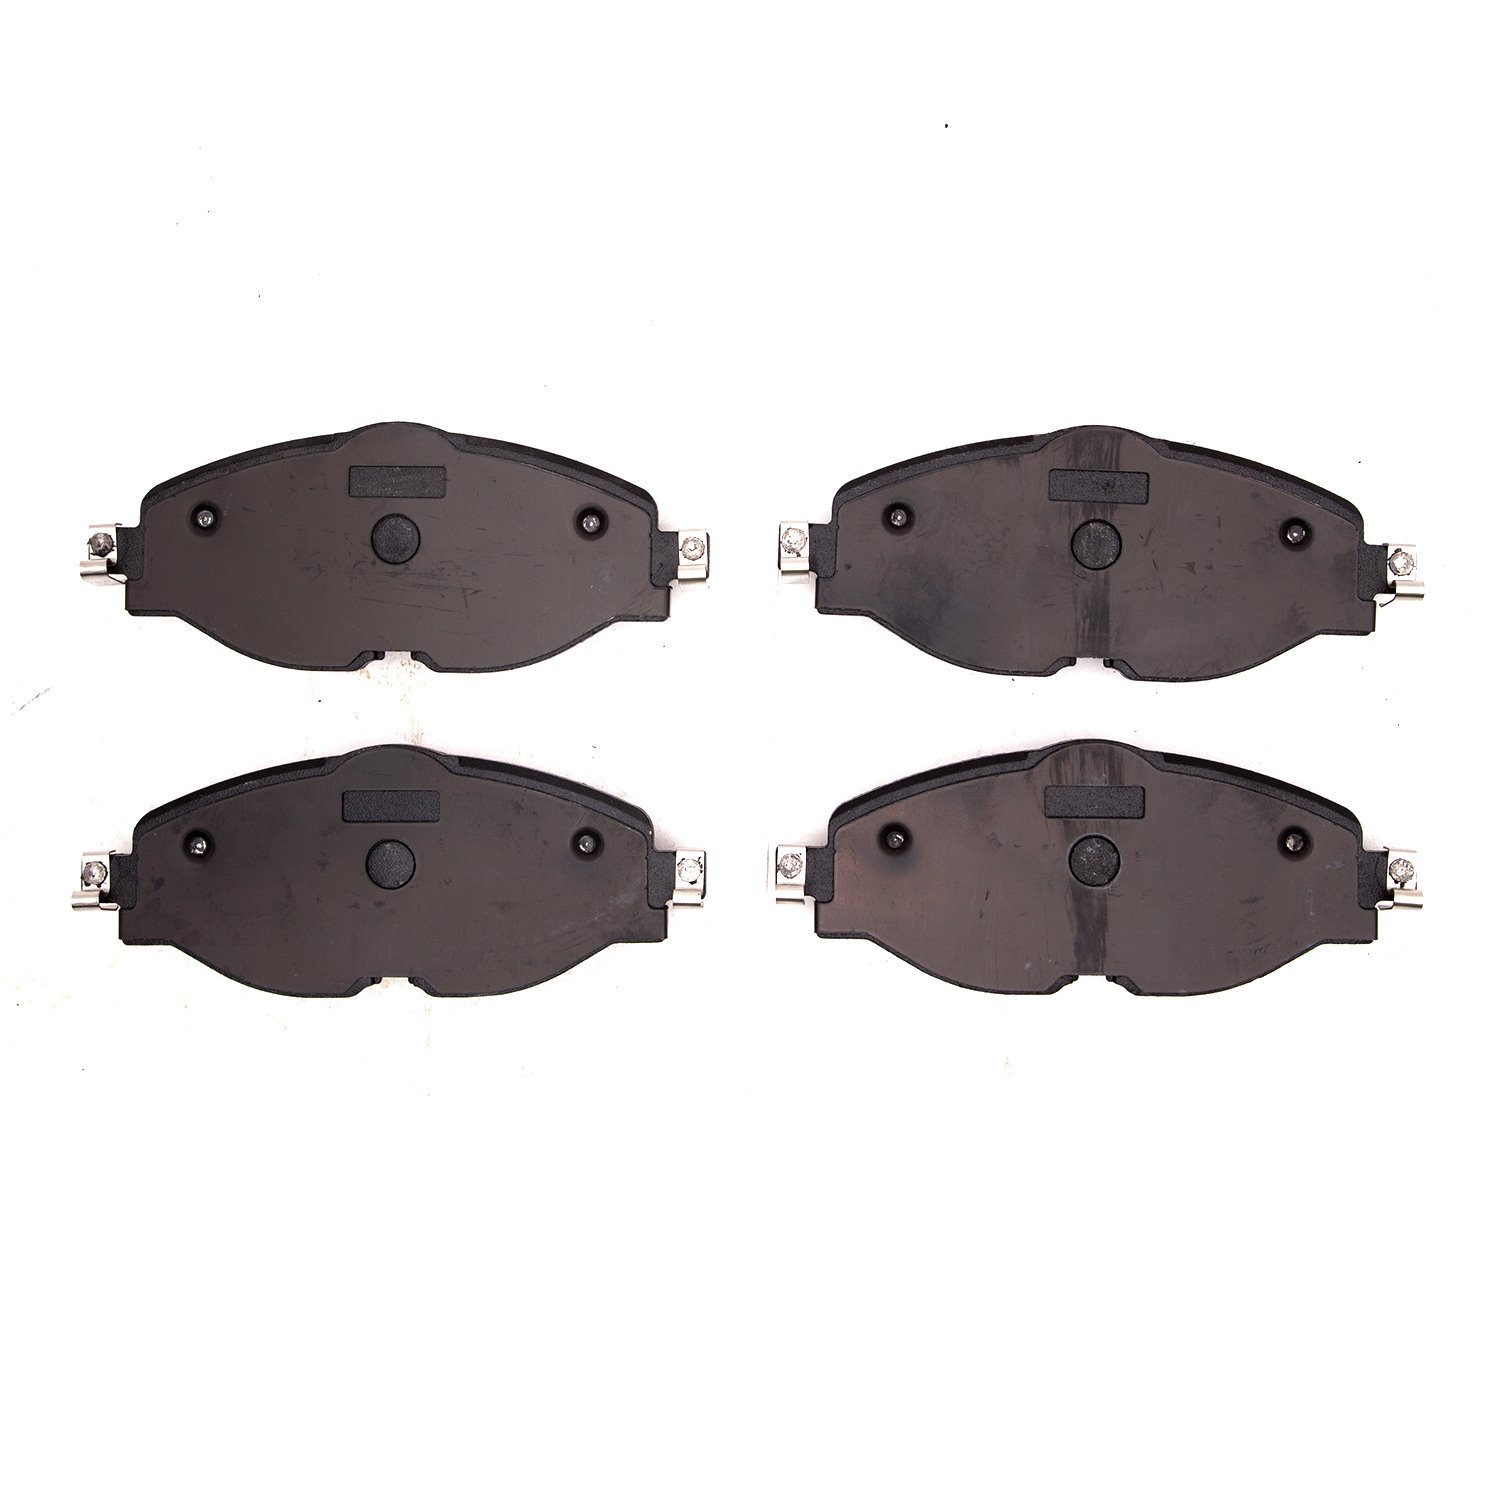 1310-1760-00 3000-Series Ceramic Brake Pads, Fits Select Multiple Makes/Models, Position: Front